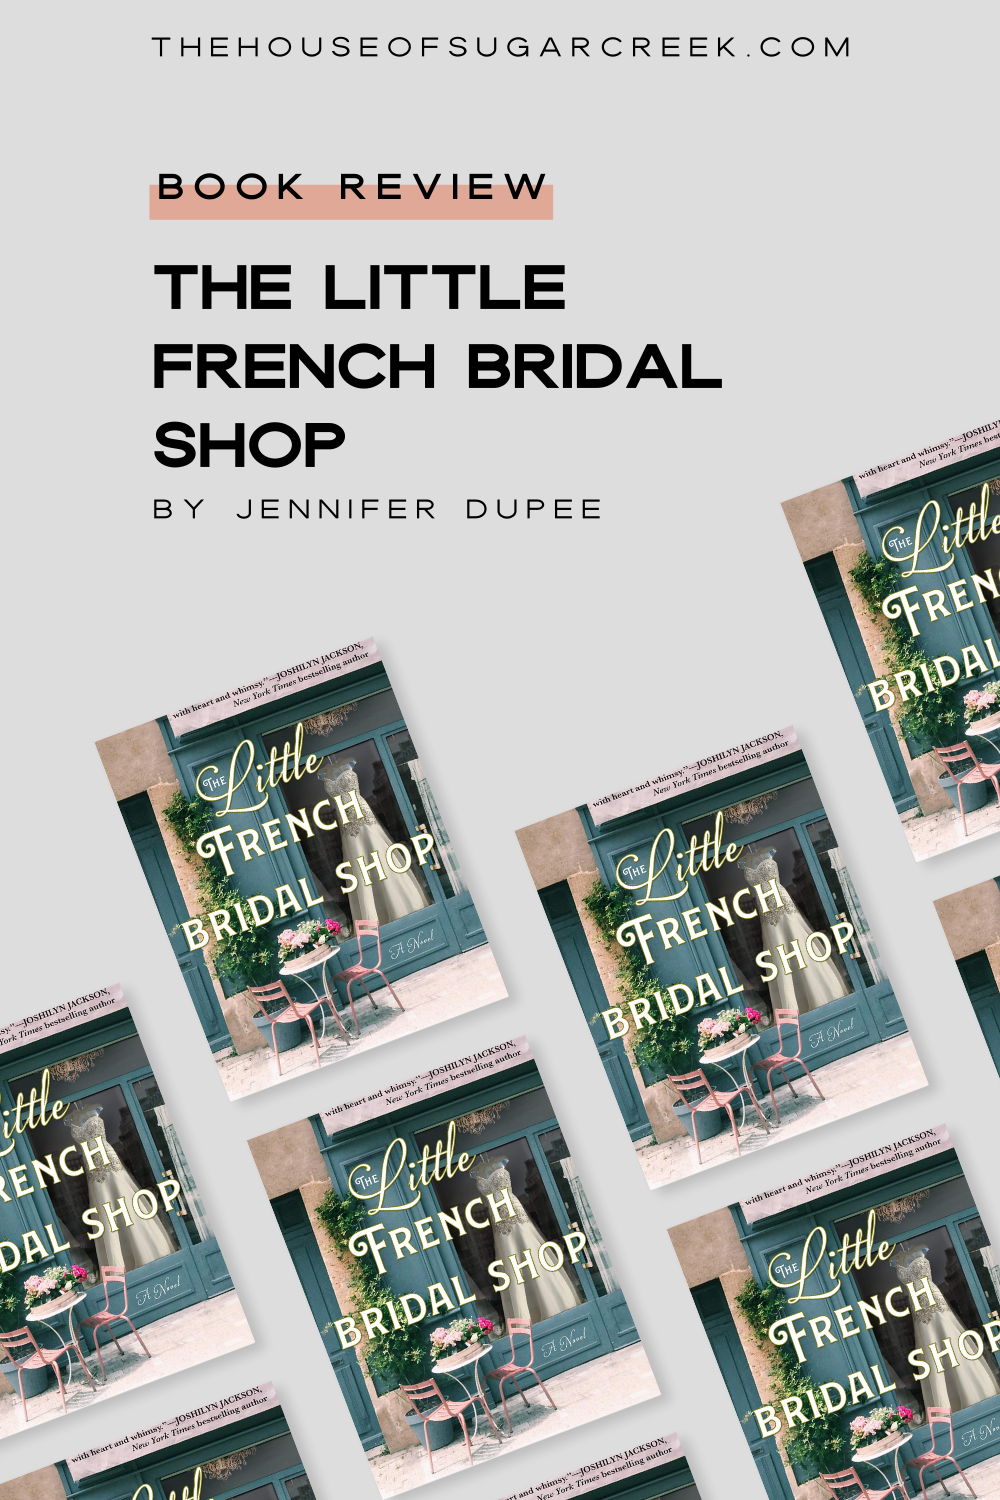 Book Review - The Little French Bridal Shop by Jennifer Dupee